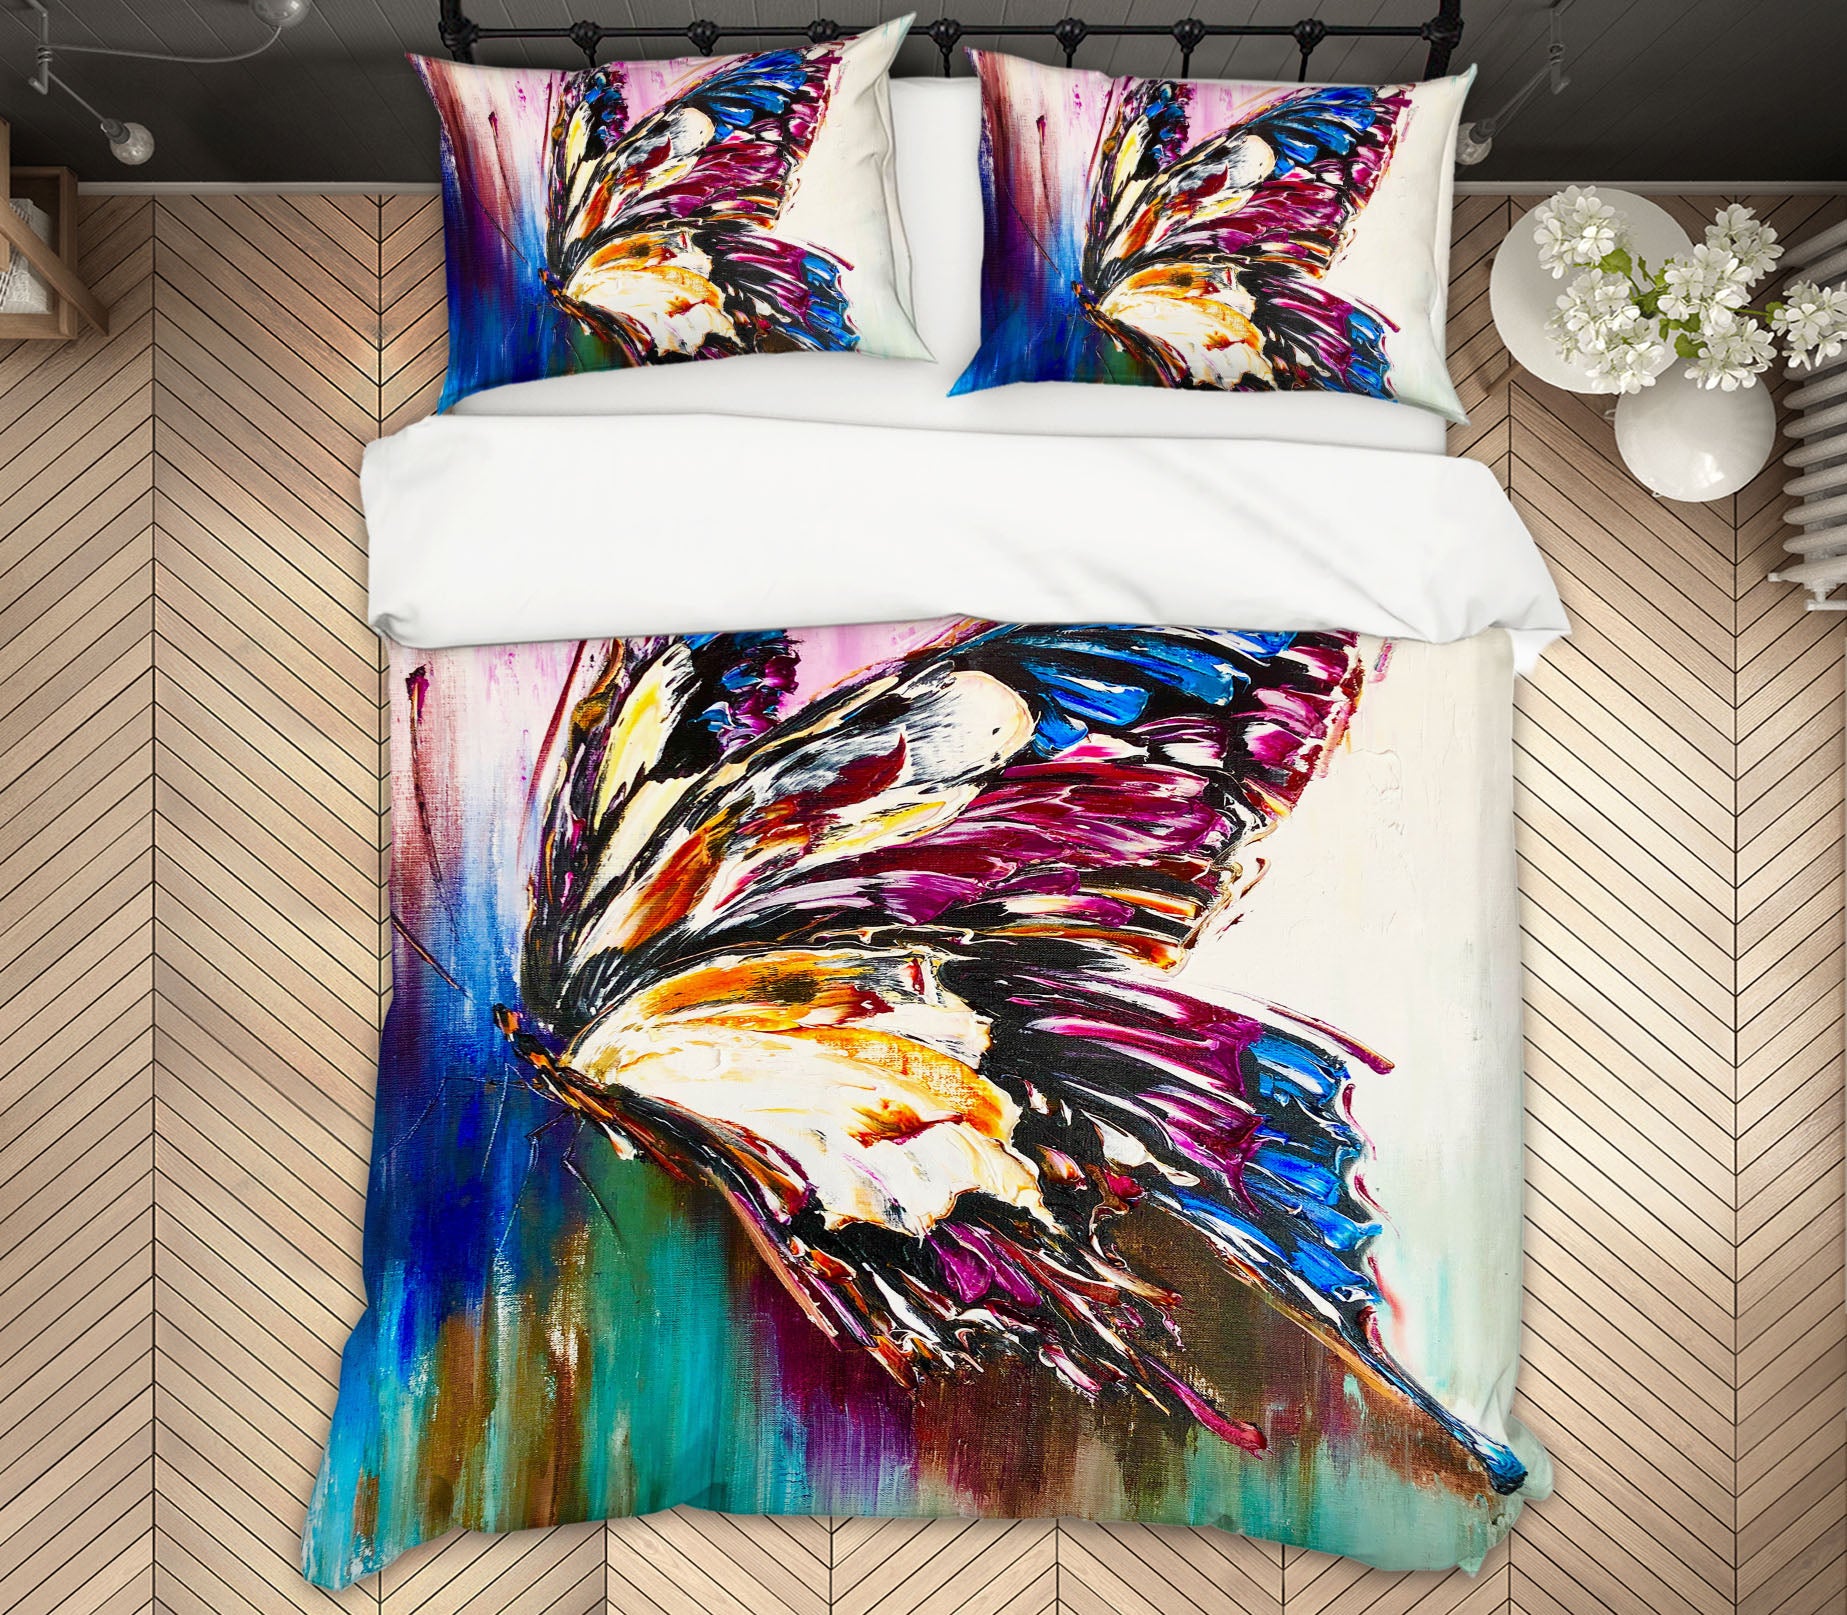 3D Colorful Butterfly 580 Skromova Marina Bedding Bed Pillowcases Quilt